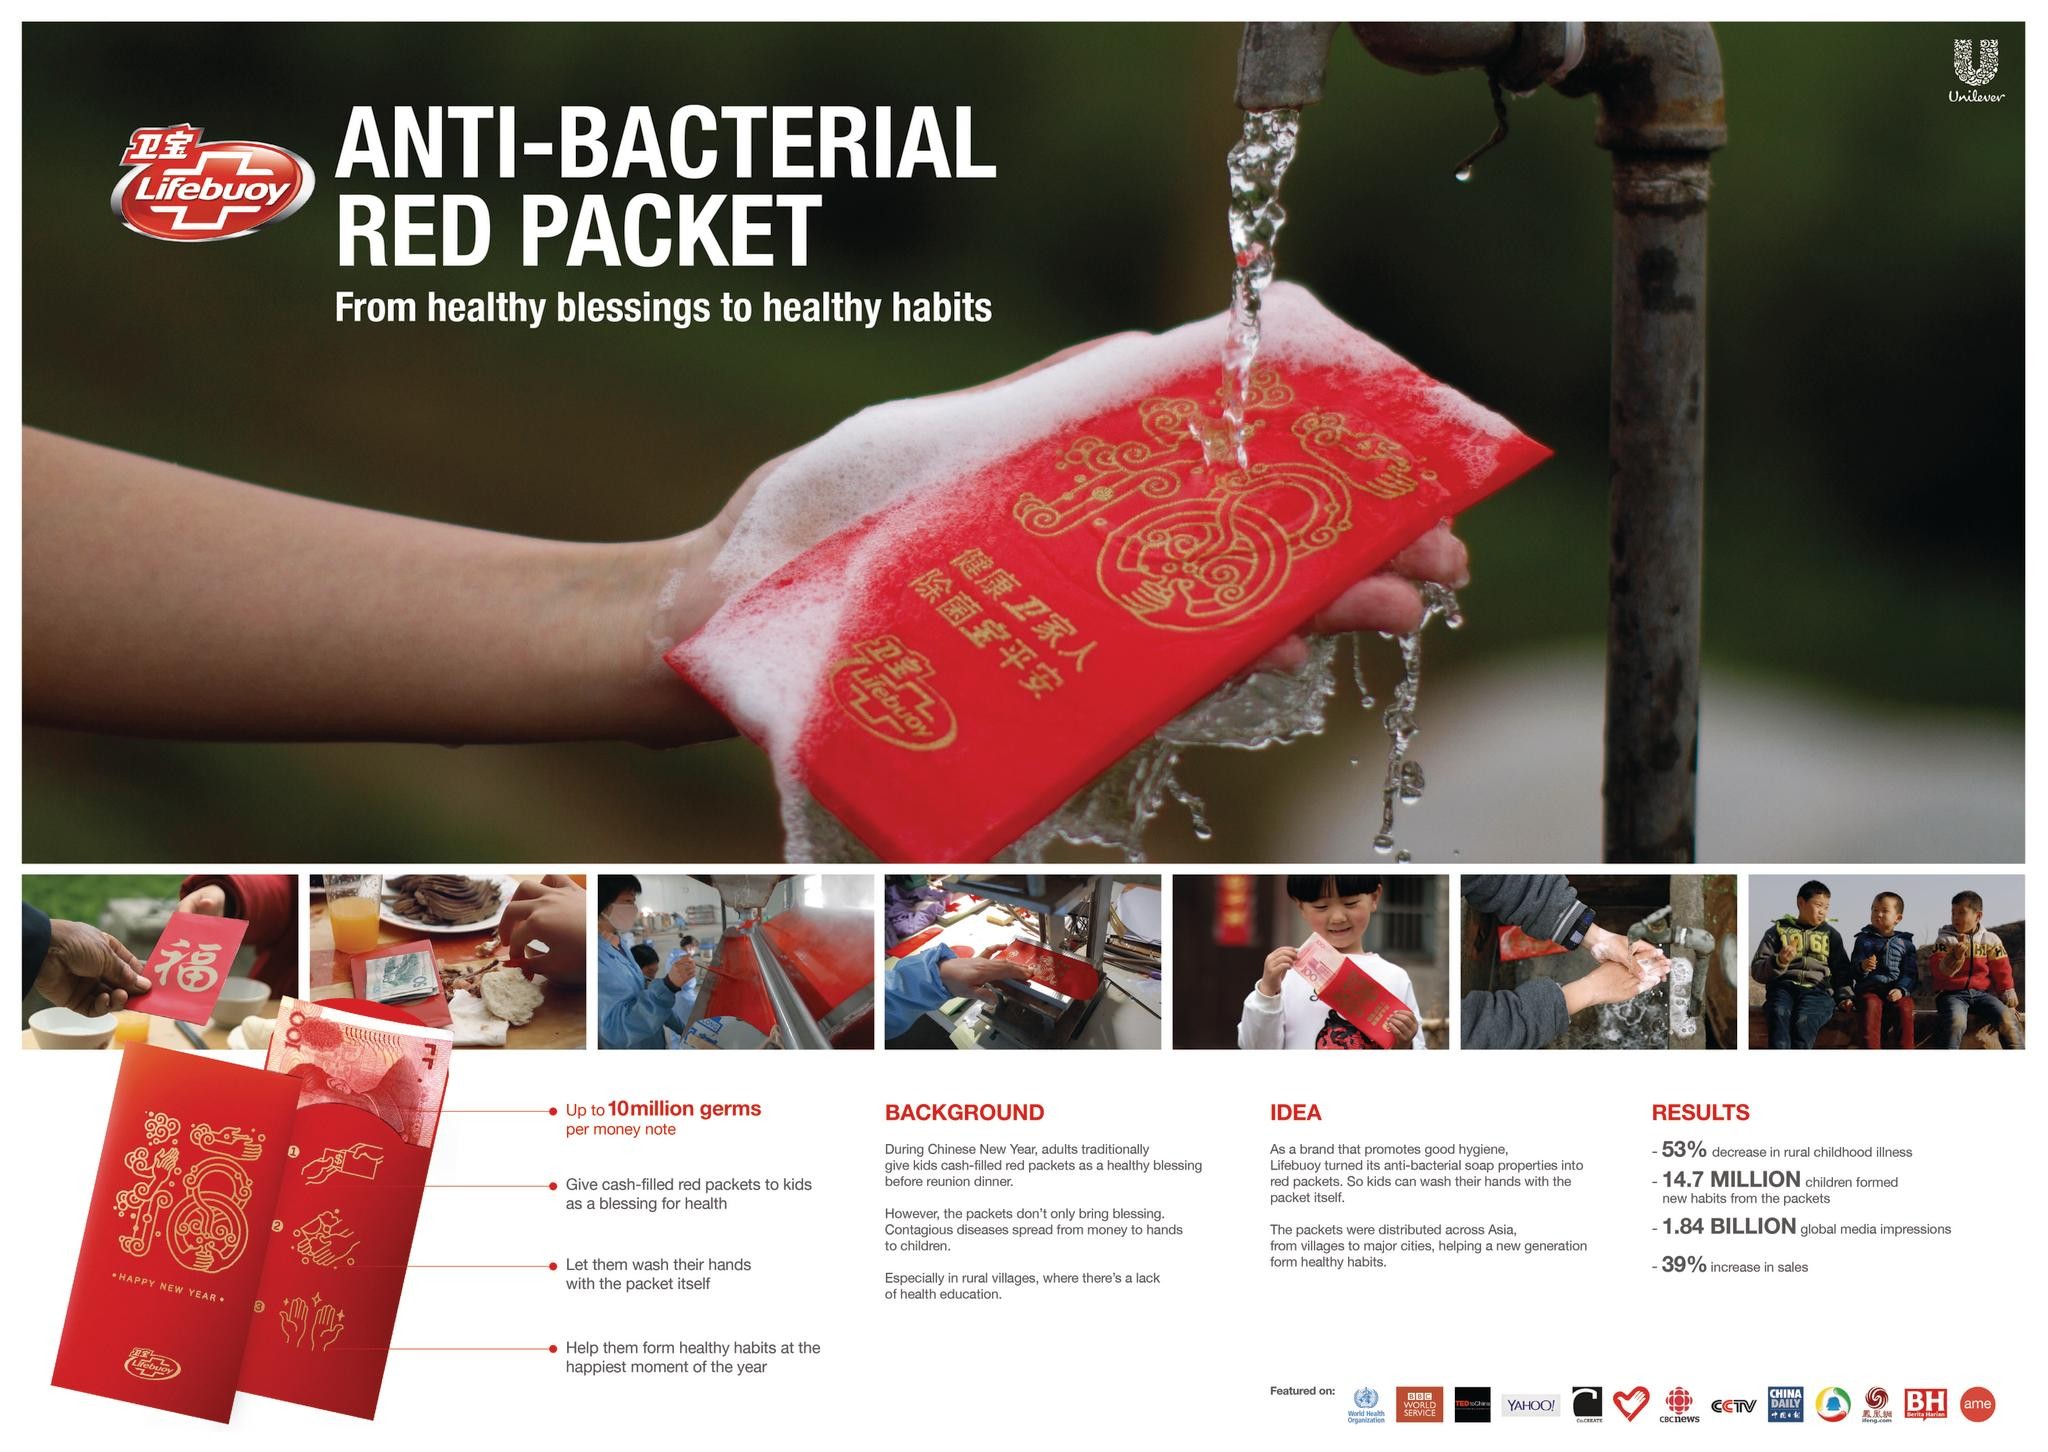 ANTI-BACTERIAL RED PACKET